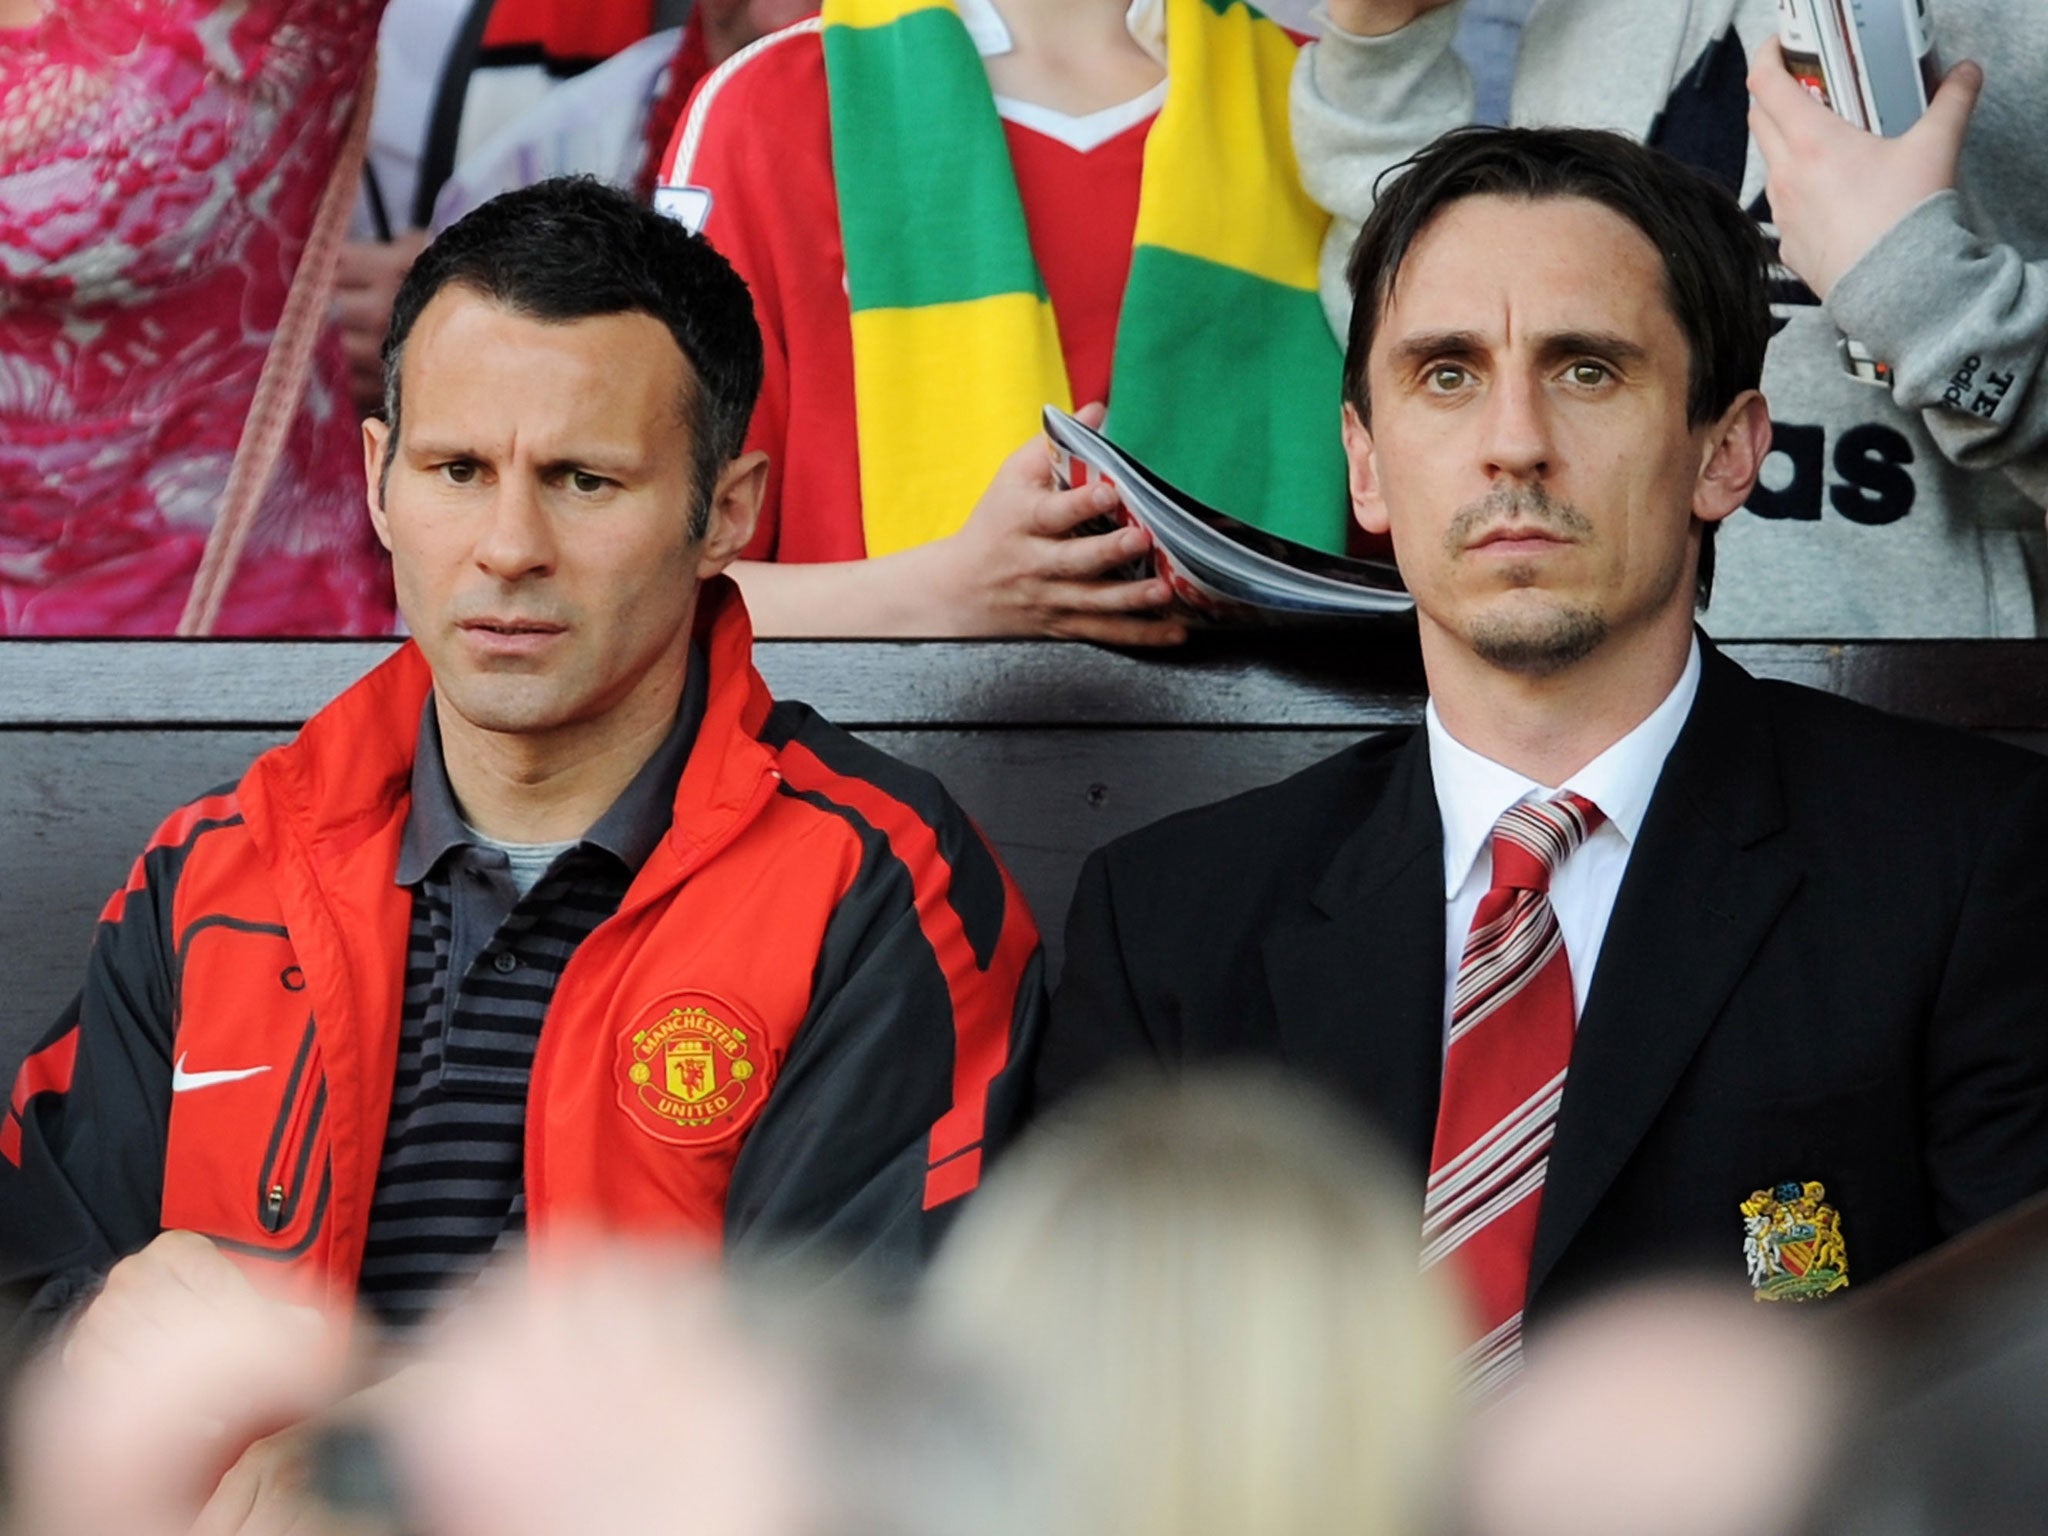 Ryan Giggs and Gary Neville are set to become the first Premier League footballers to own a synagogue